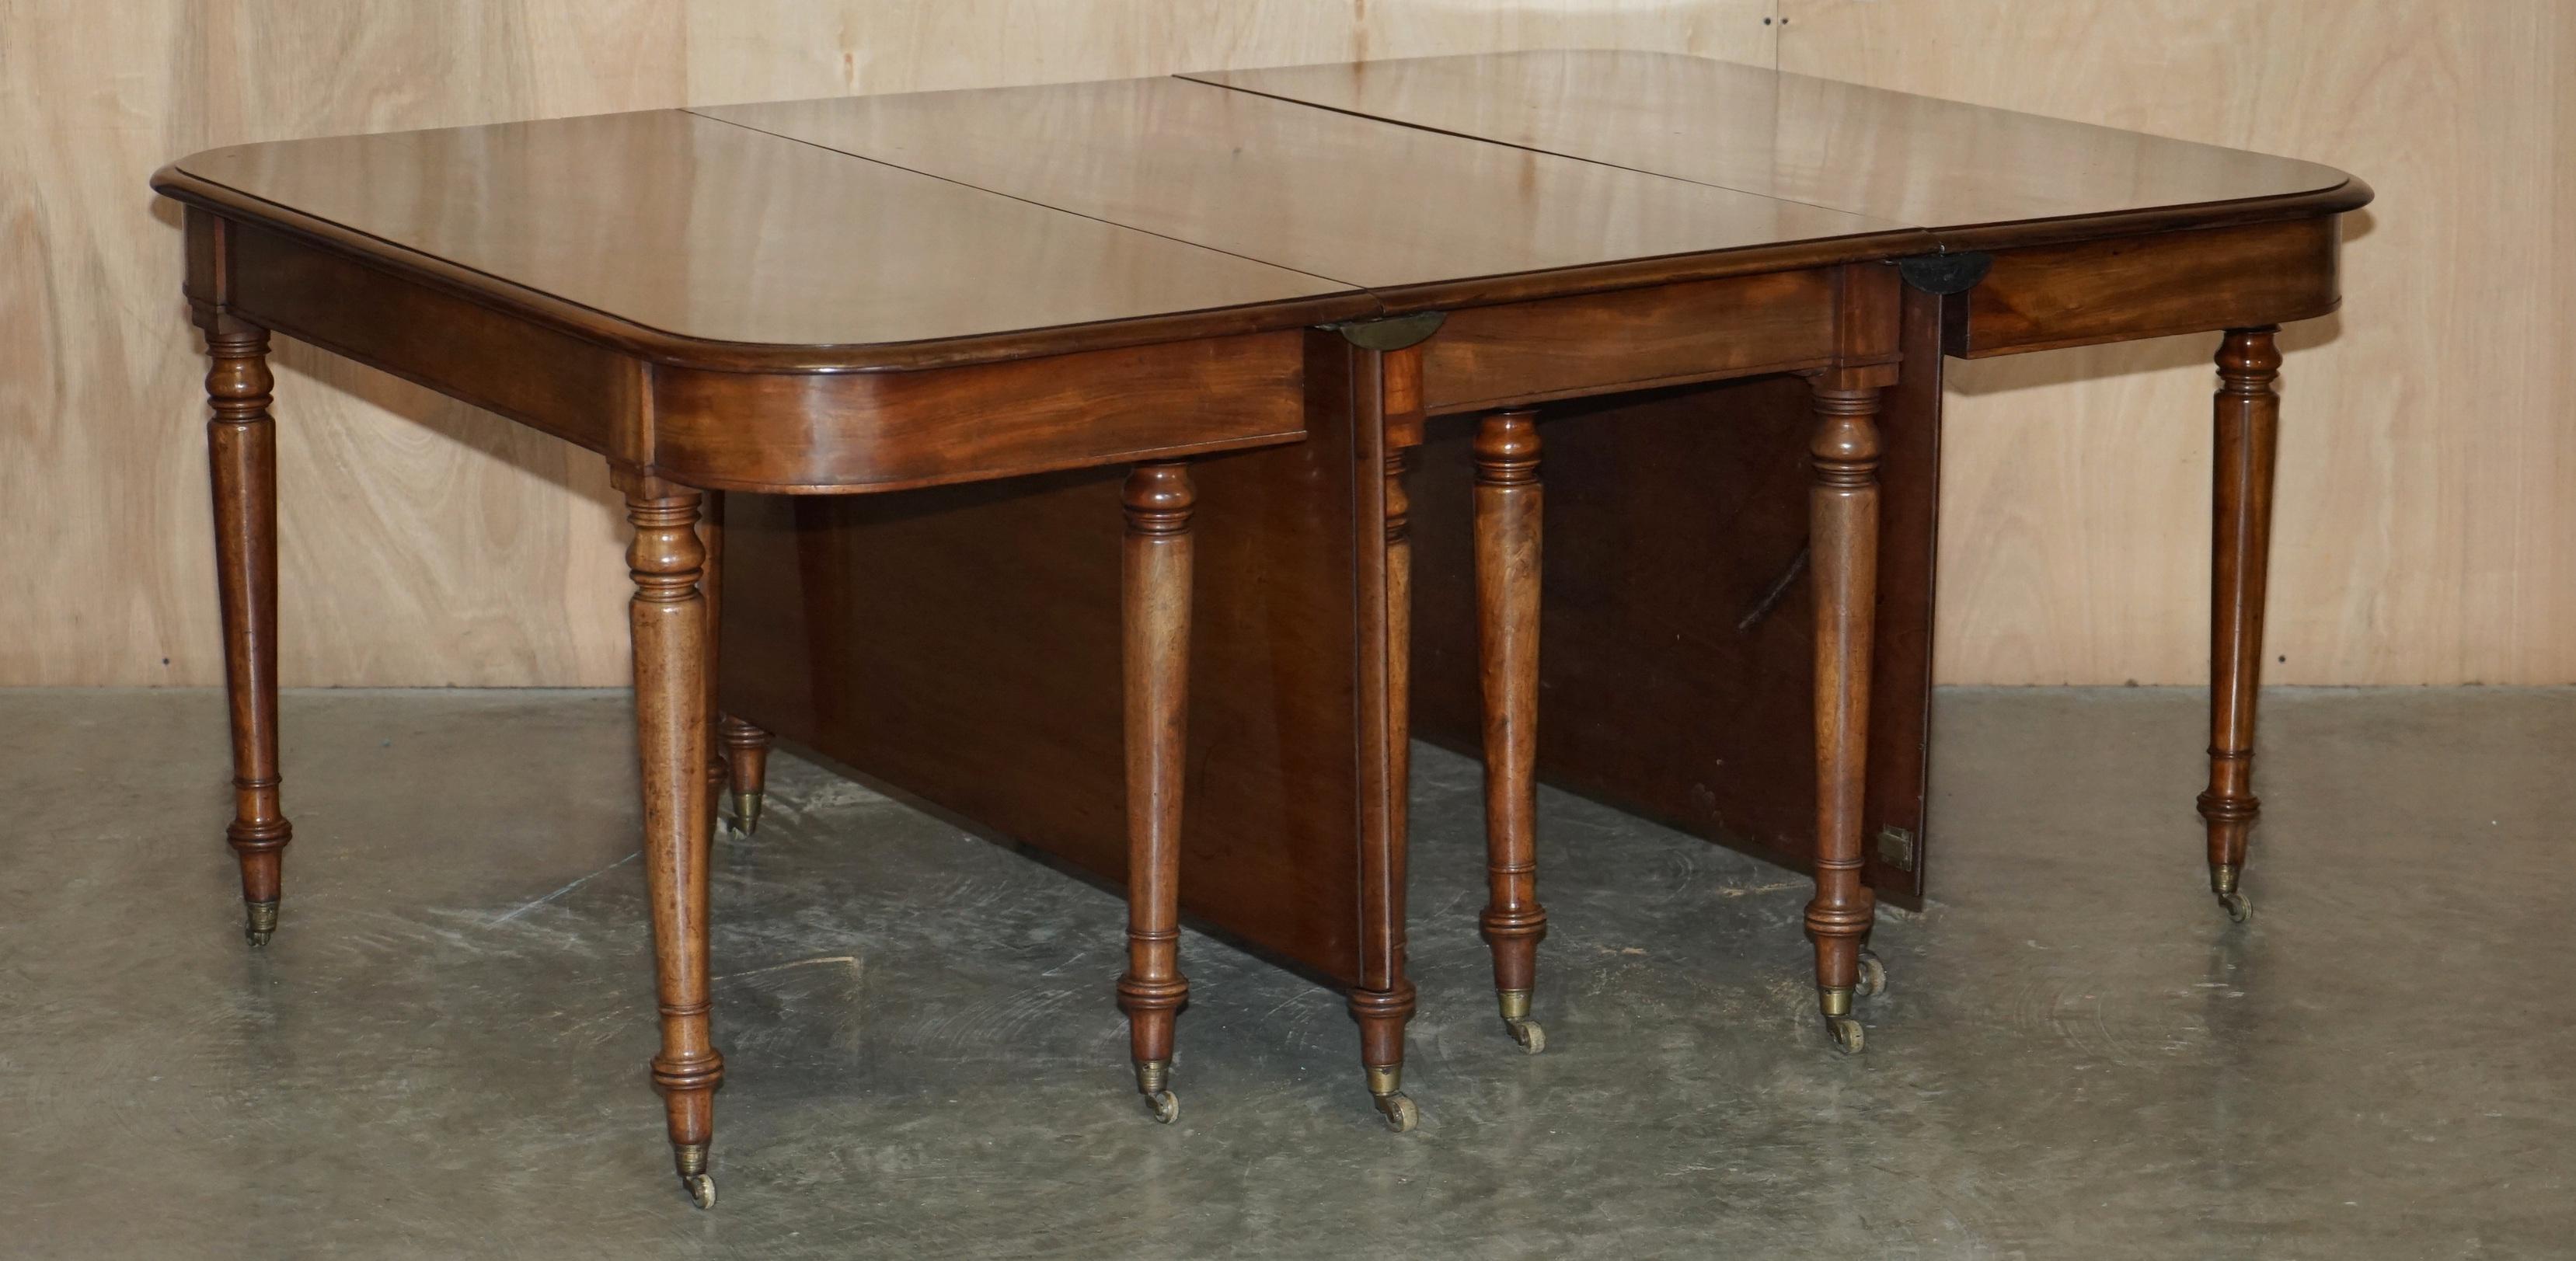 We are delighted to offer for sale this stunning fully restored circa 1820 George II flamed mahogany extending dining table 

A very well made and decorative table, this is one of the finest quality examples you will see anywhere, it is made of